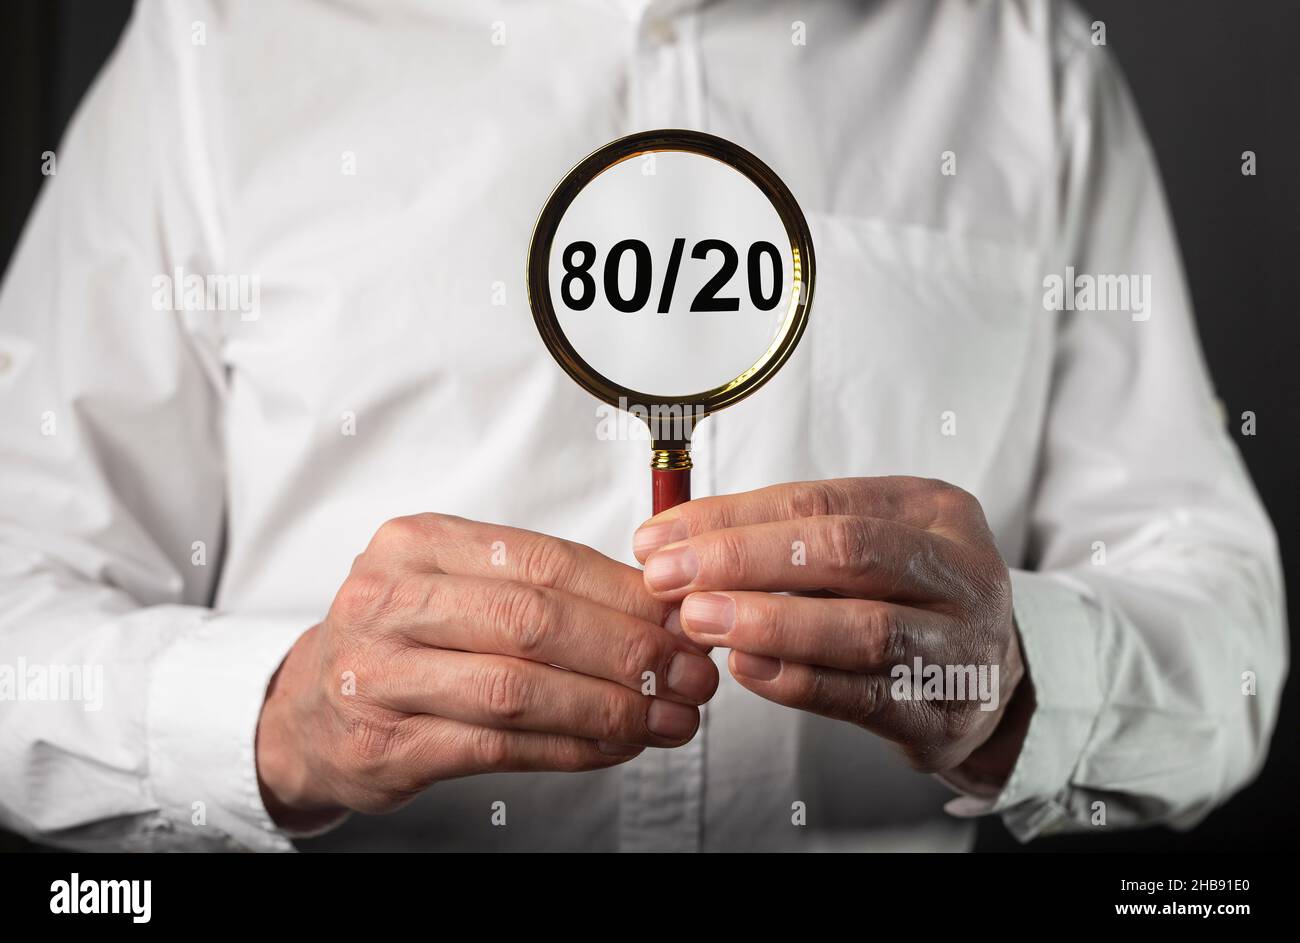 80 20 pareto principle concept, text through magnifying glass in business man hands. Stock Photo